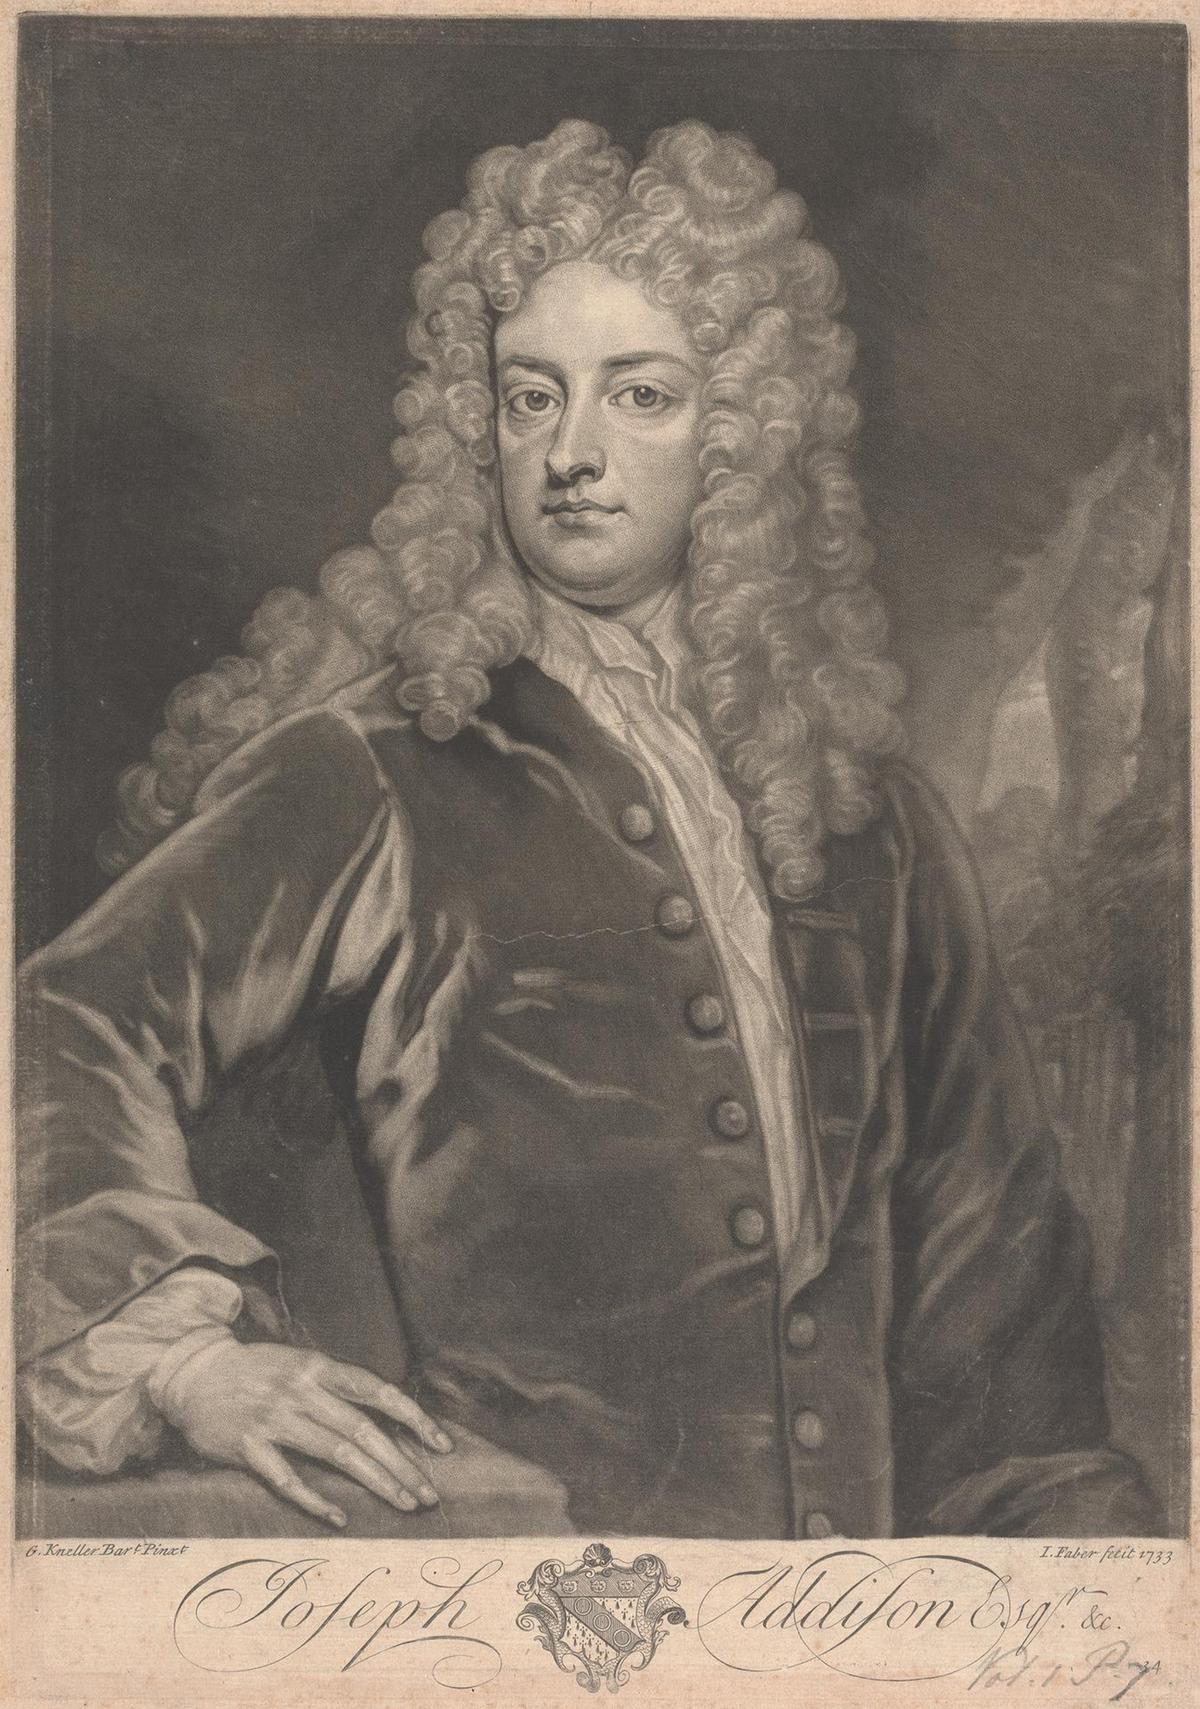 "Joseph Addison Esq.," 1733, by John Faber the Younger and Sir Godfrey Kneller. Mezzotint on medium, slightly textured, beige, laid paper. Yale Center for British Art, New Haven, Conn. (Public Domain)